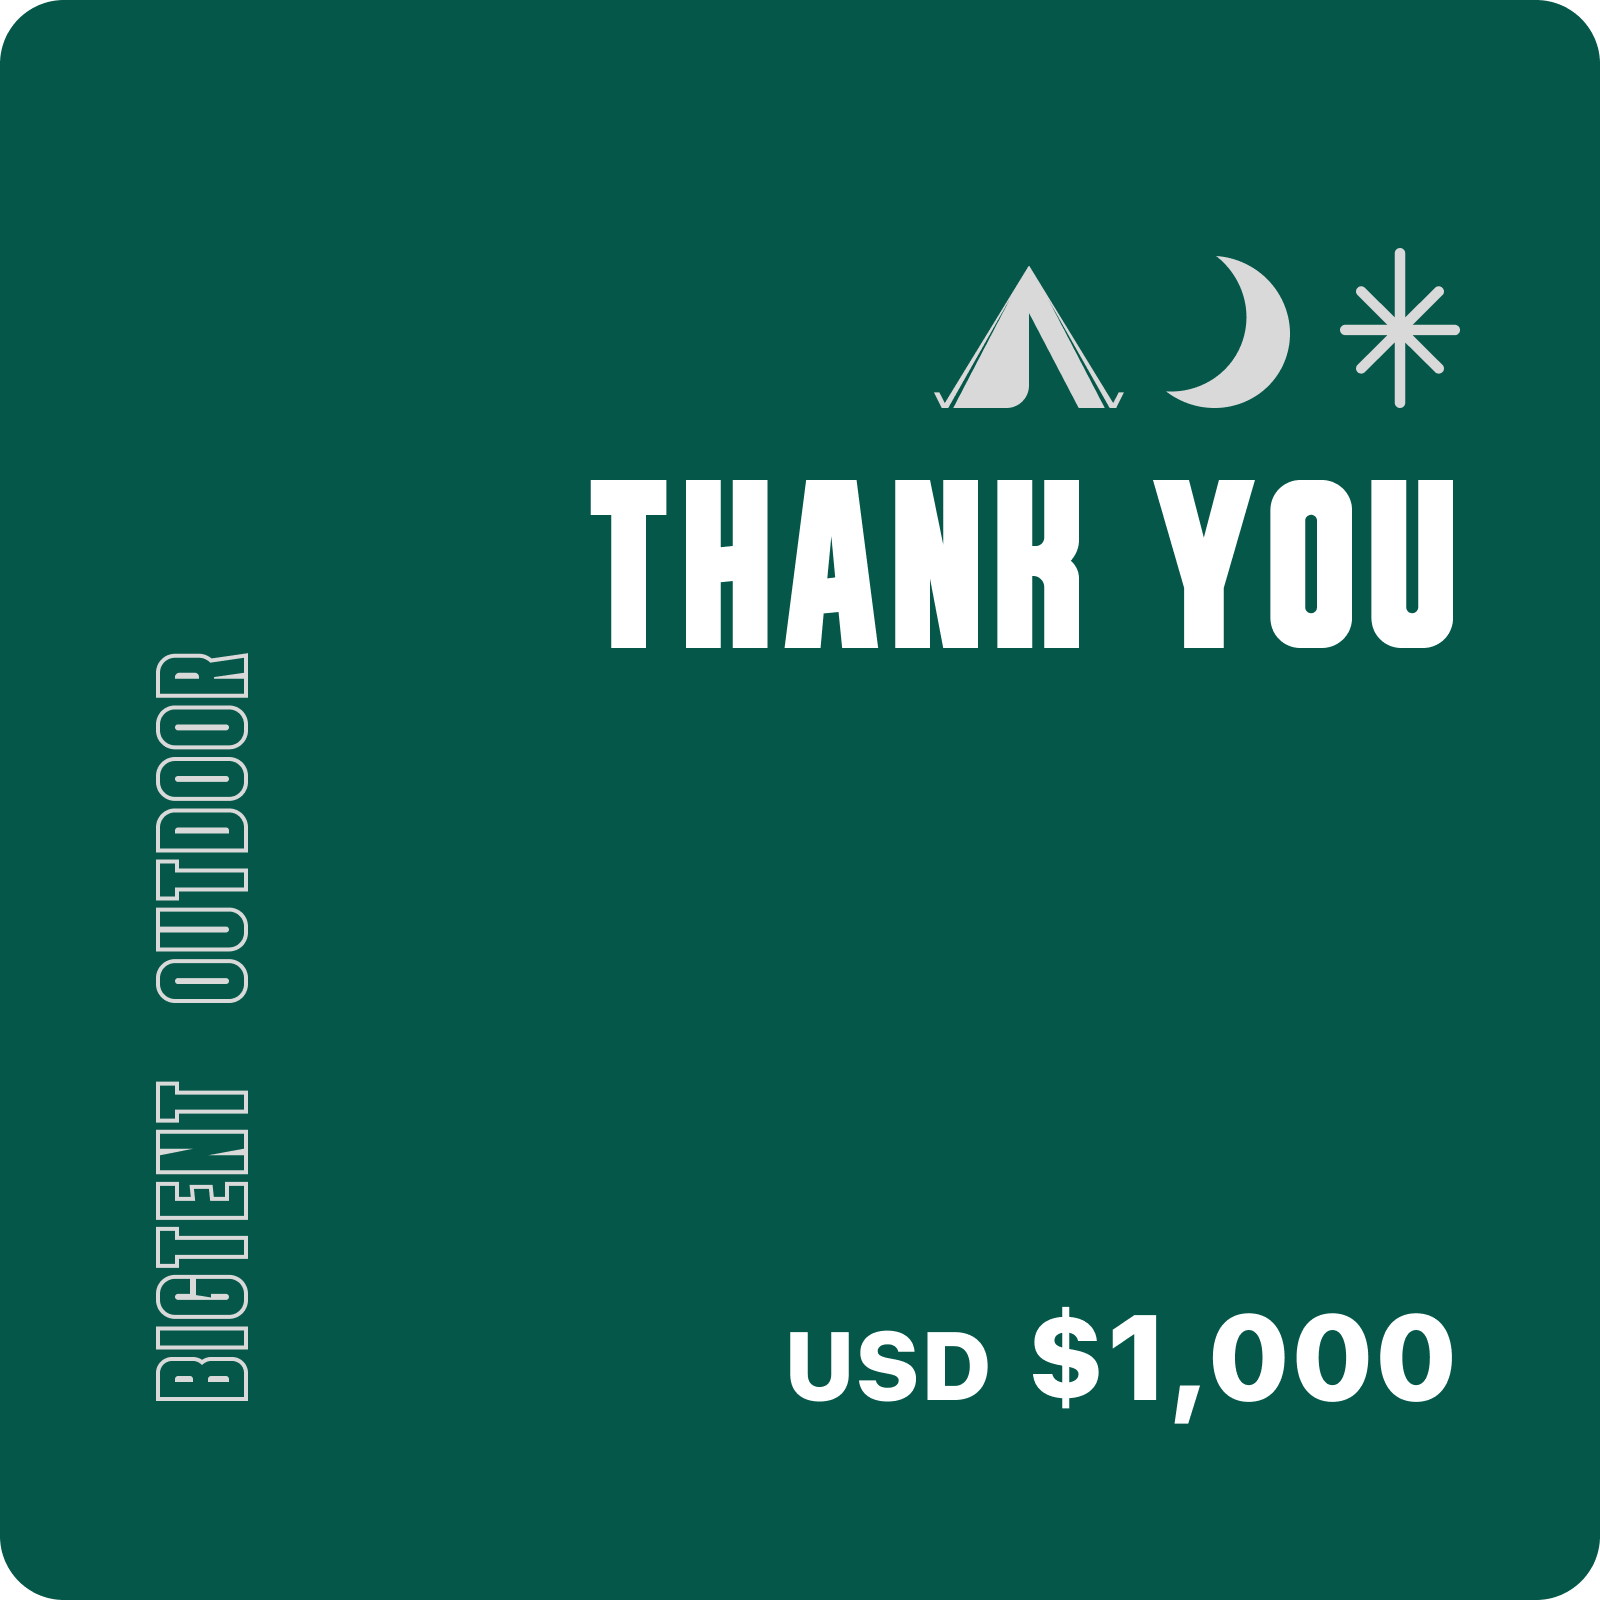 bigtent giftcard $1,000 usd